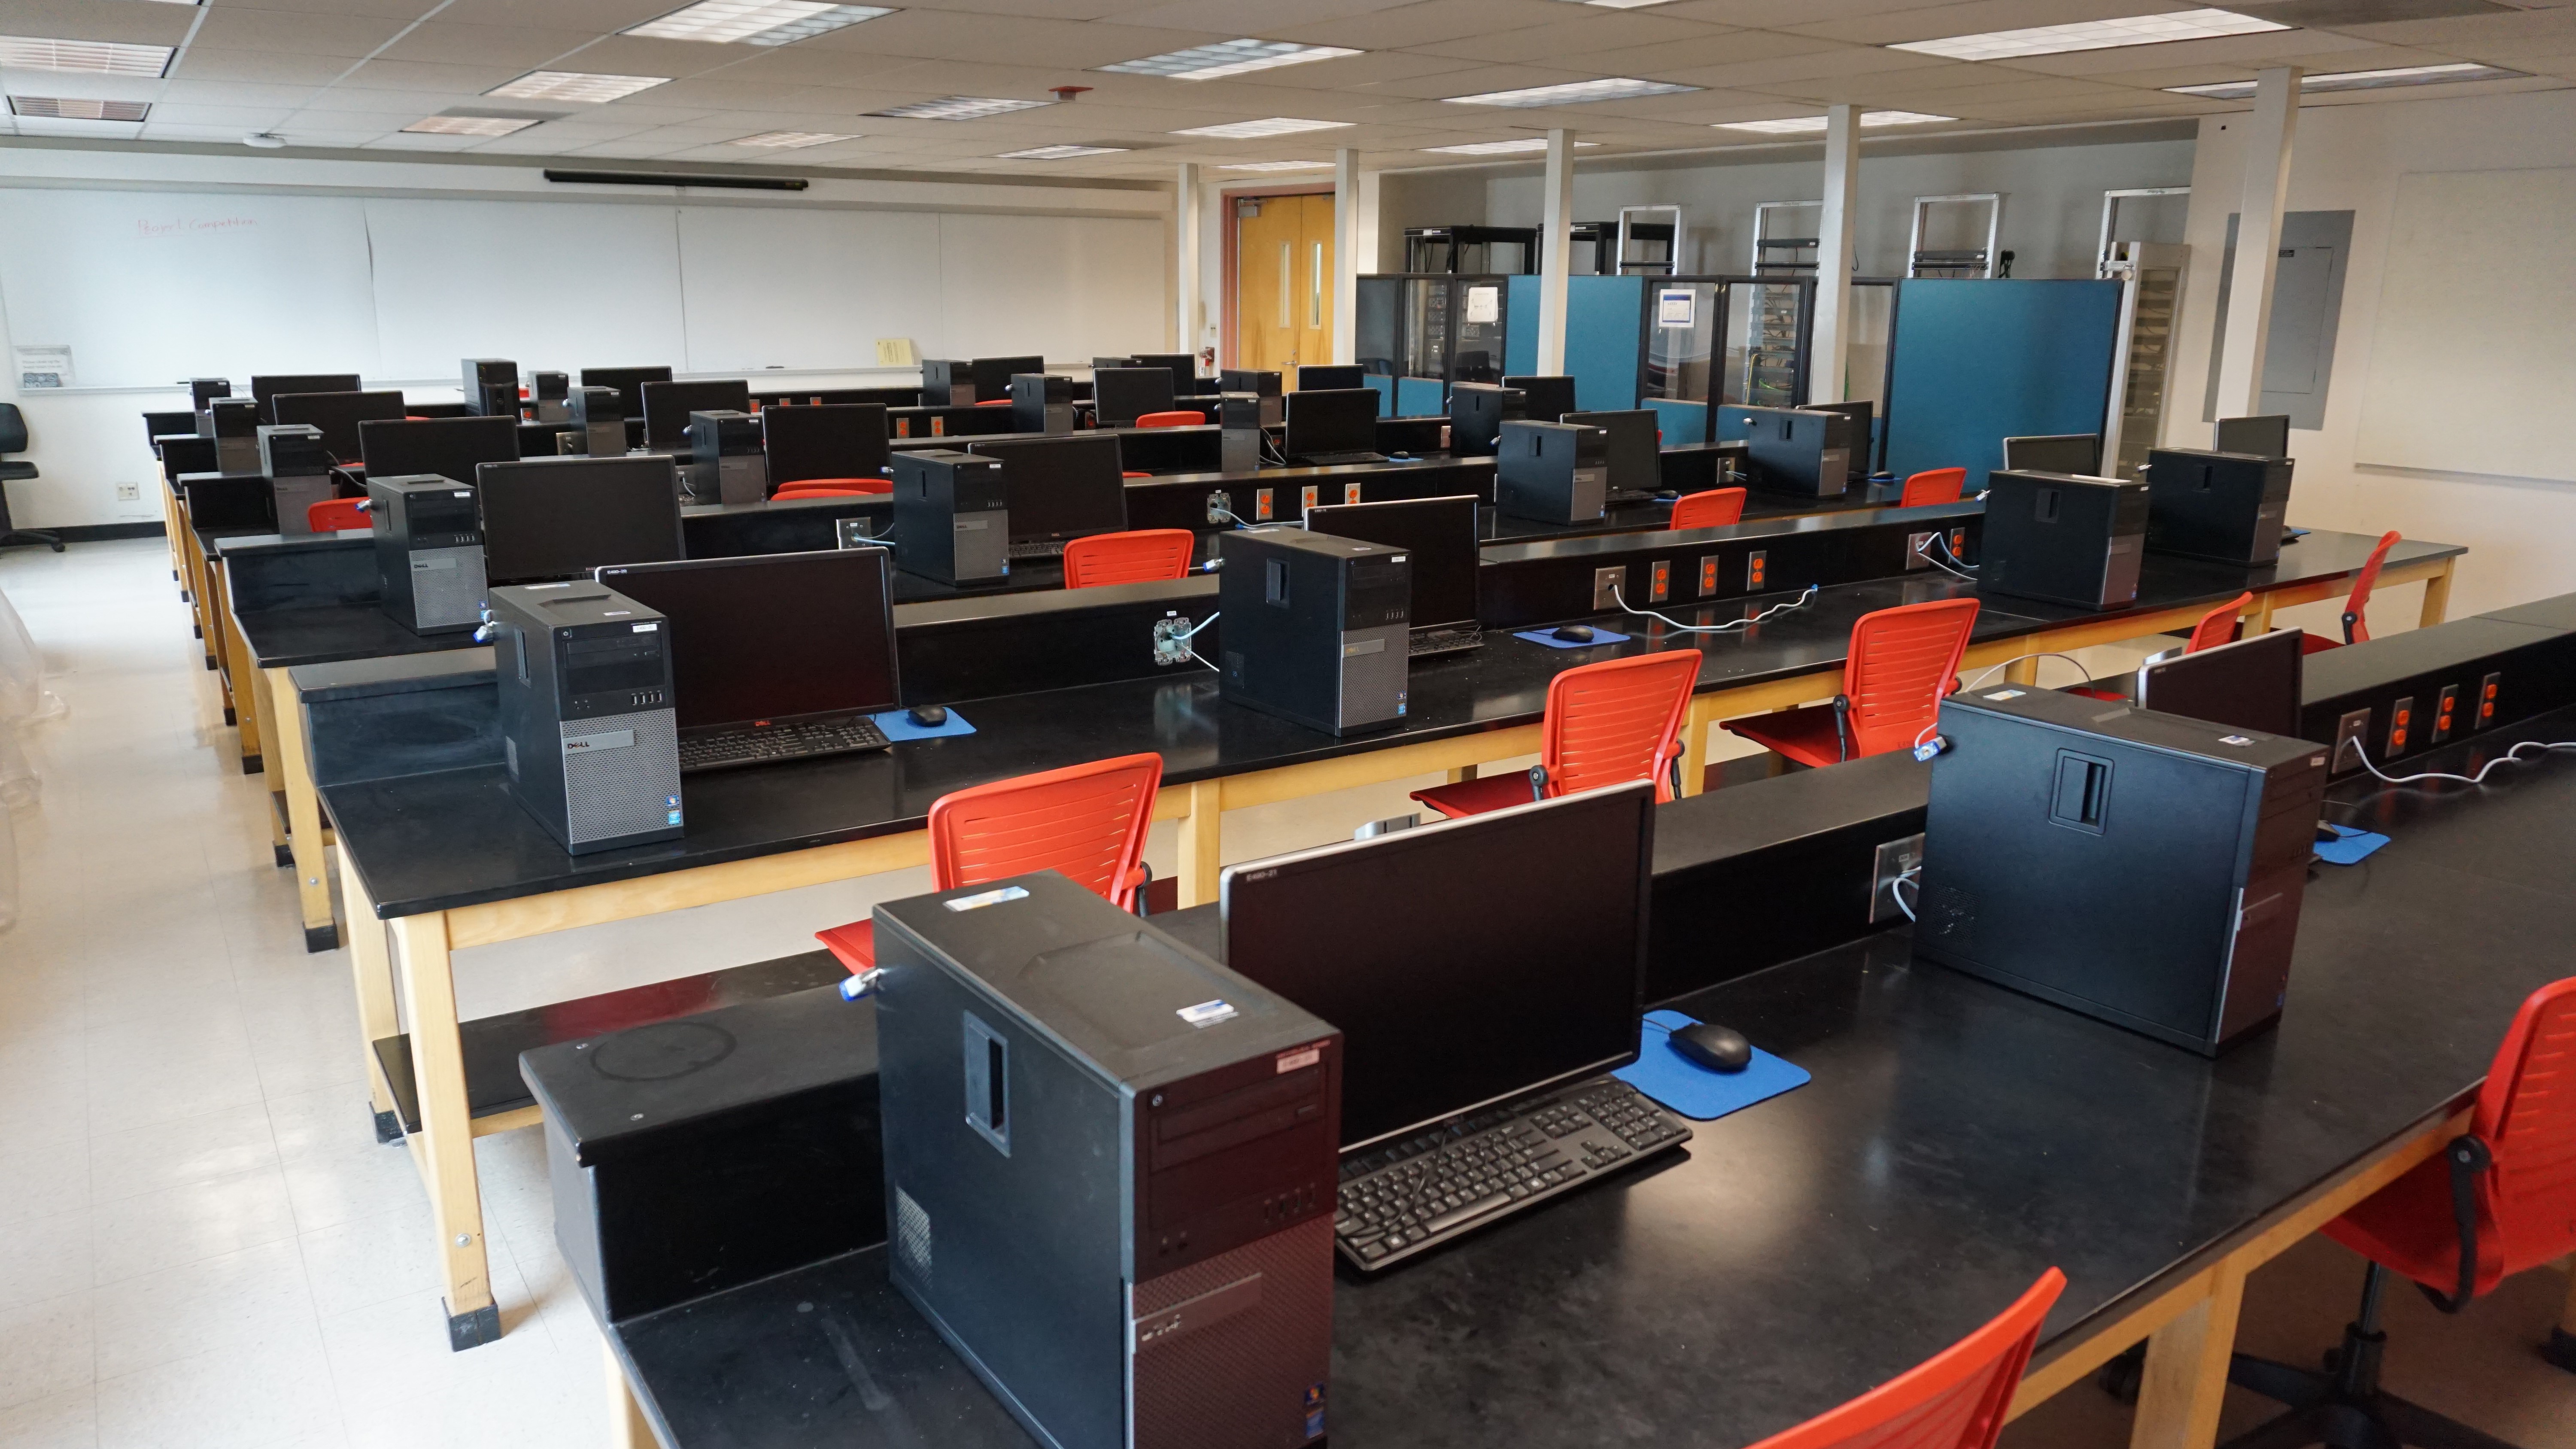 A classroom full of computer stations and bright orange desk chairs.